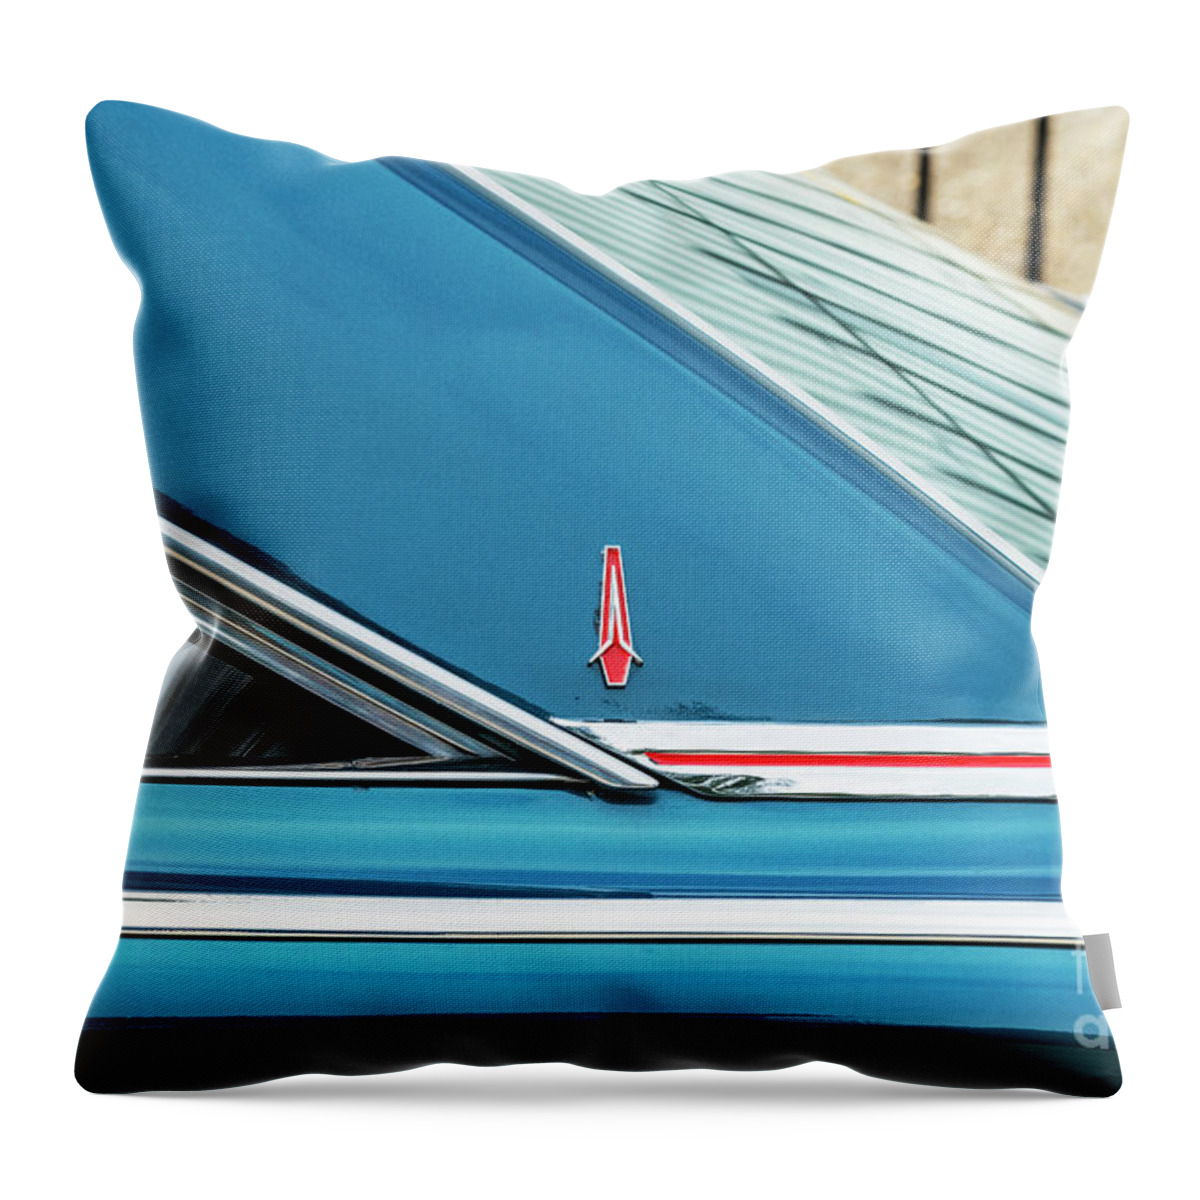 Plymouth Throw Pillow featuring the photograph 1966 Plymouth Coupe by Tim Gainey